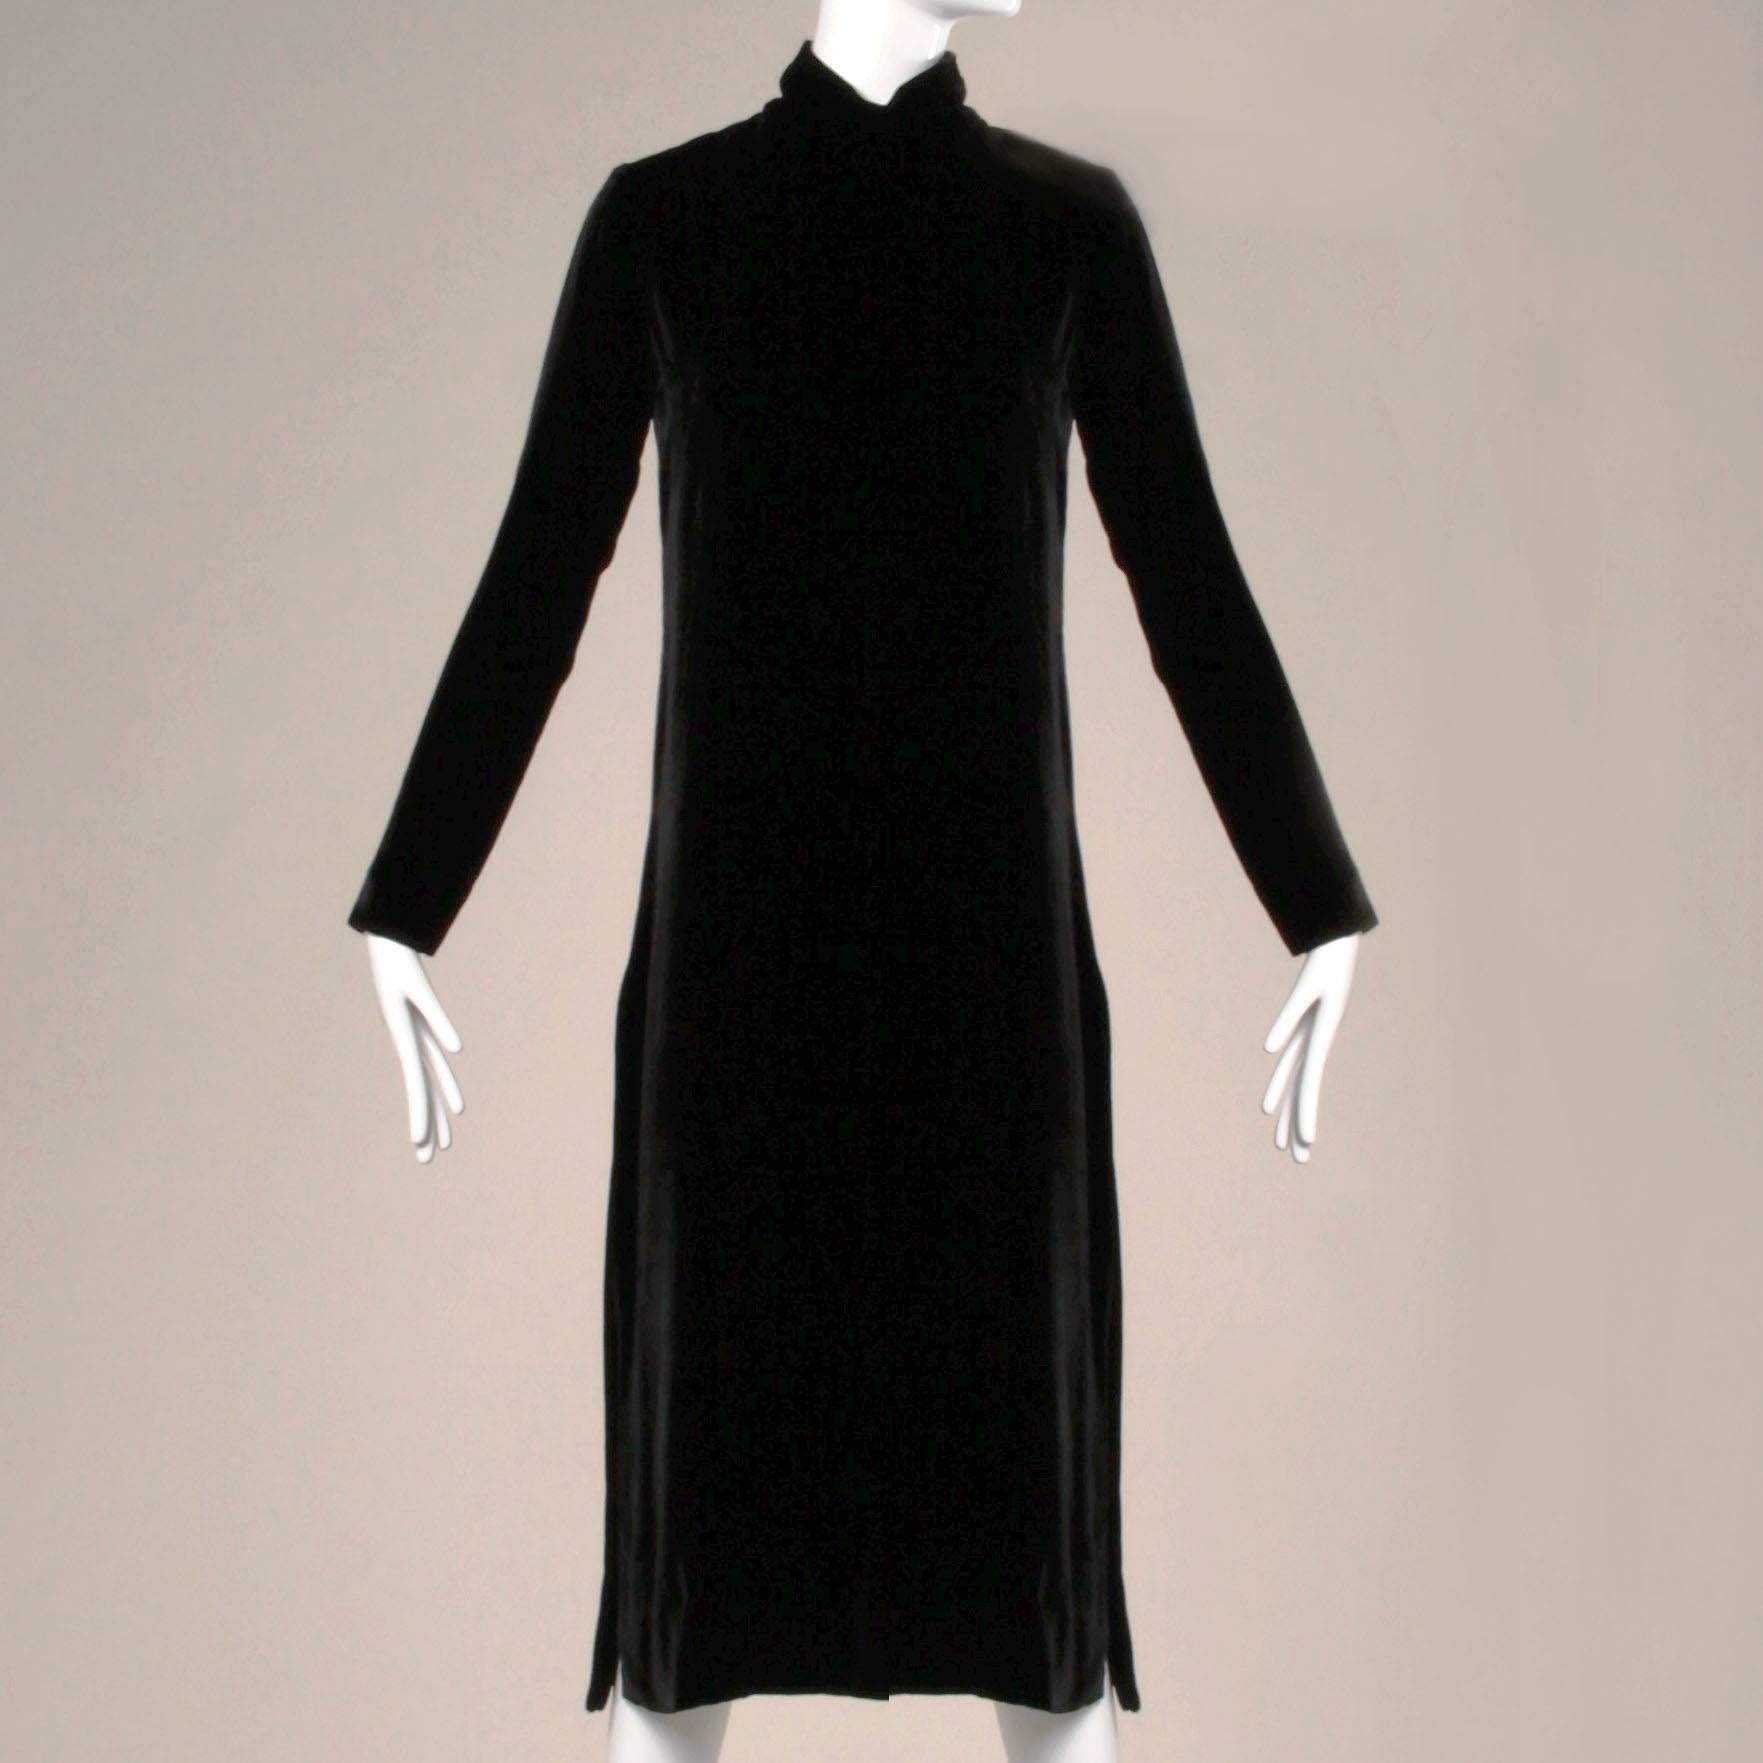 Gorgeous simple and chic soft velvet tunic dress by Jean Patou for I. Magnin. Turtleneck, long sleeves and high side slits. Amazing construction and couture hand-stitched detailing. This would look great worn as is or over a pair of pants or